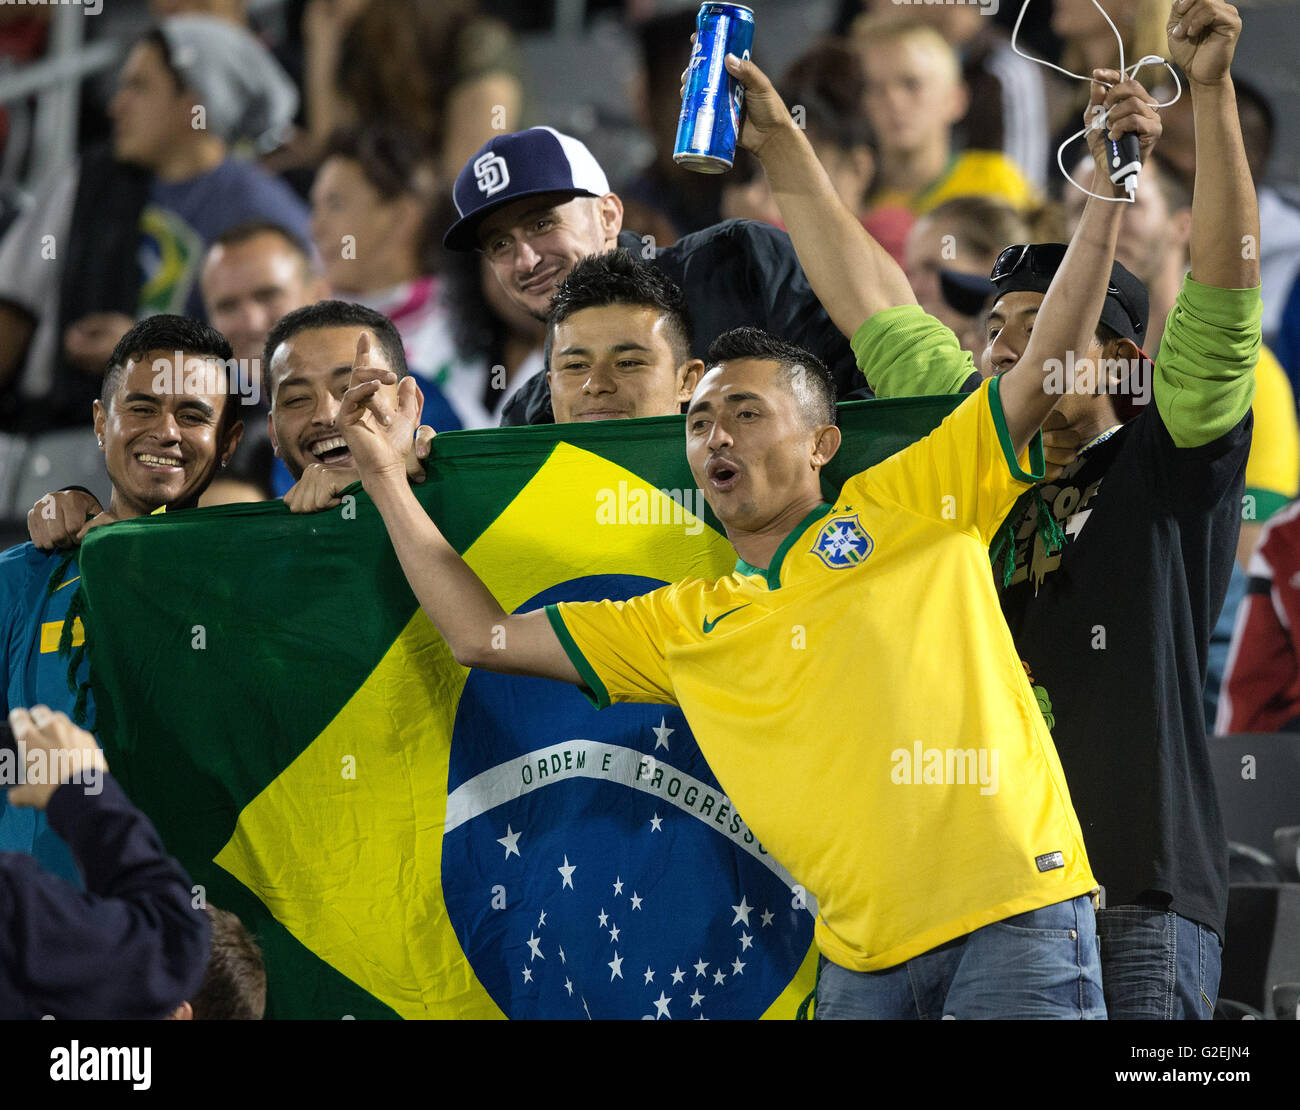 Commerce City, Colorado, USA. 29th May, 2016. Brazil Fans celebrate after their team scores the 2nd. goal of the game during a friendly match against Panama before the Copa de Oro at Dicks Sporting Goods Park Sunday Evening. Brazil beats Panama 2-0. Credit:  Hector Acevedo/ZUMA Wire/Alamy Live News Stock Photo